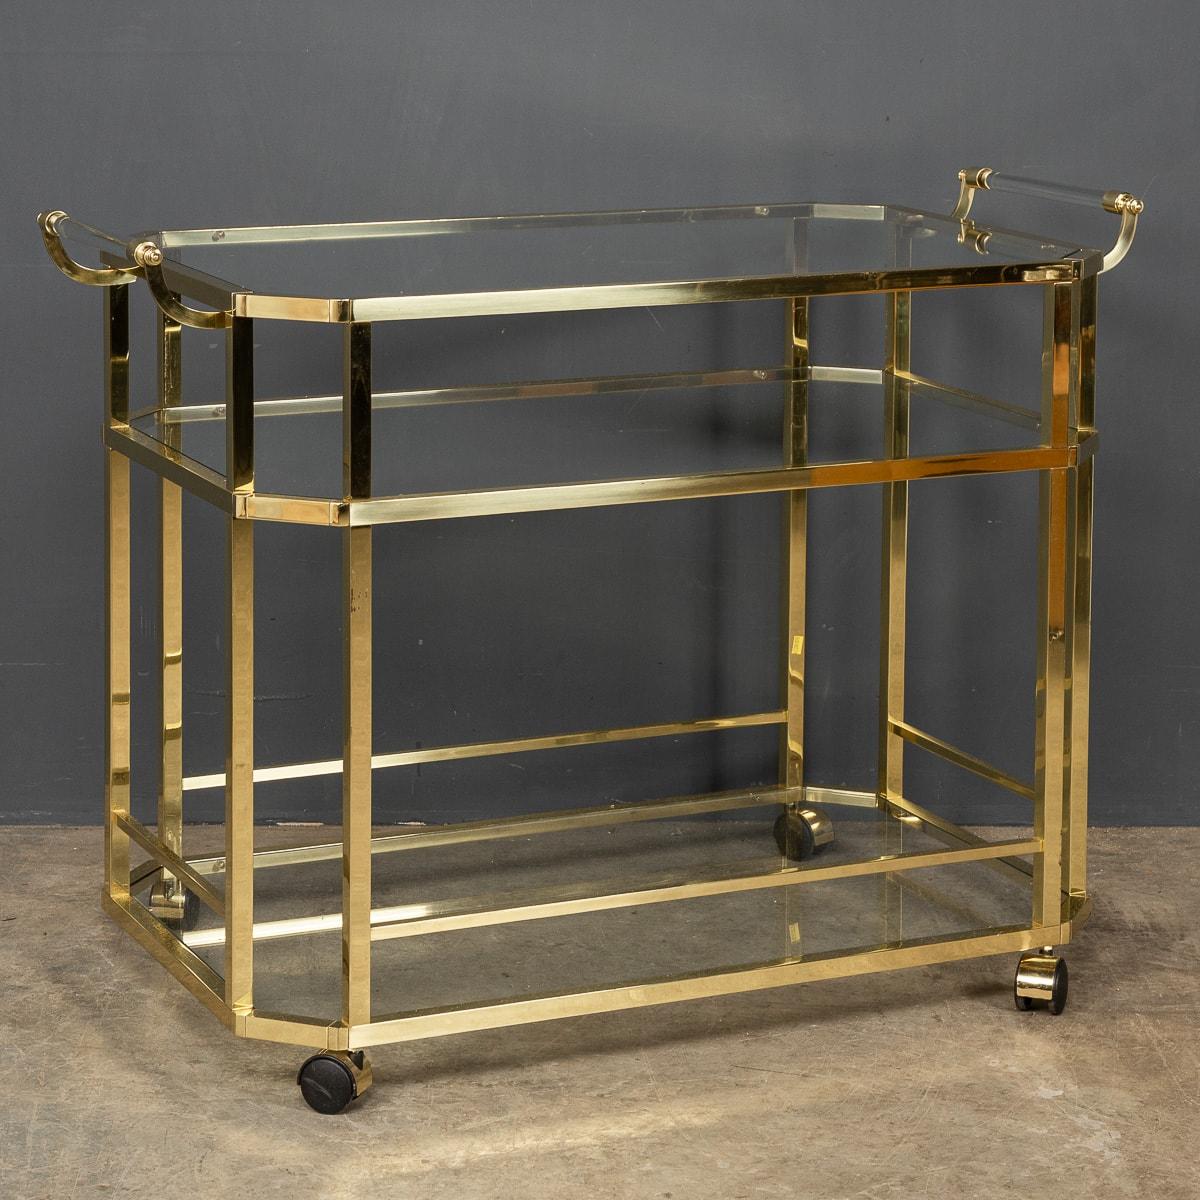 A French bar trolley composed of brass and glass with a lucite handle to one end, in fabulous condition with smooth rolling castors.

CONDITION
In Great Condition - wear consistent with age.

Size
Height: 75cm
Width: 106cm
Depth: 55cm.